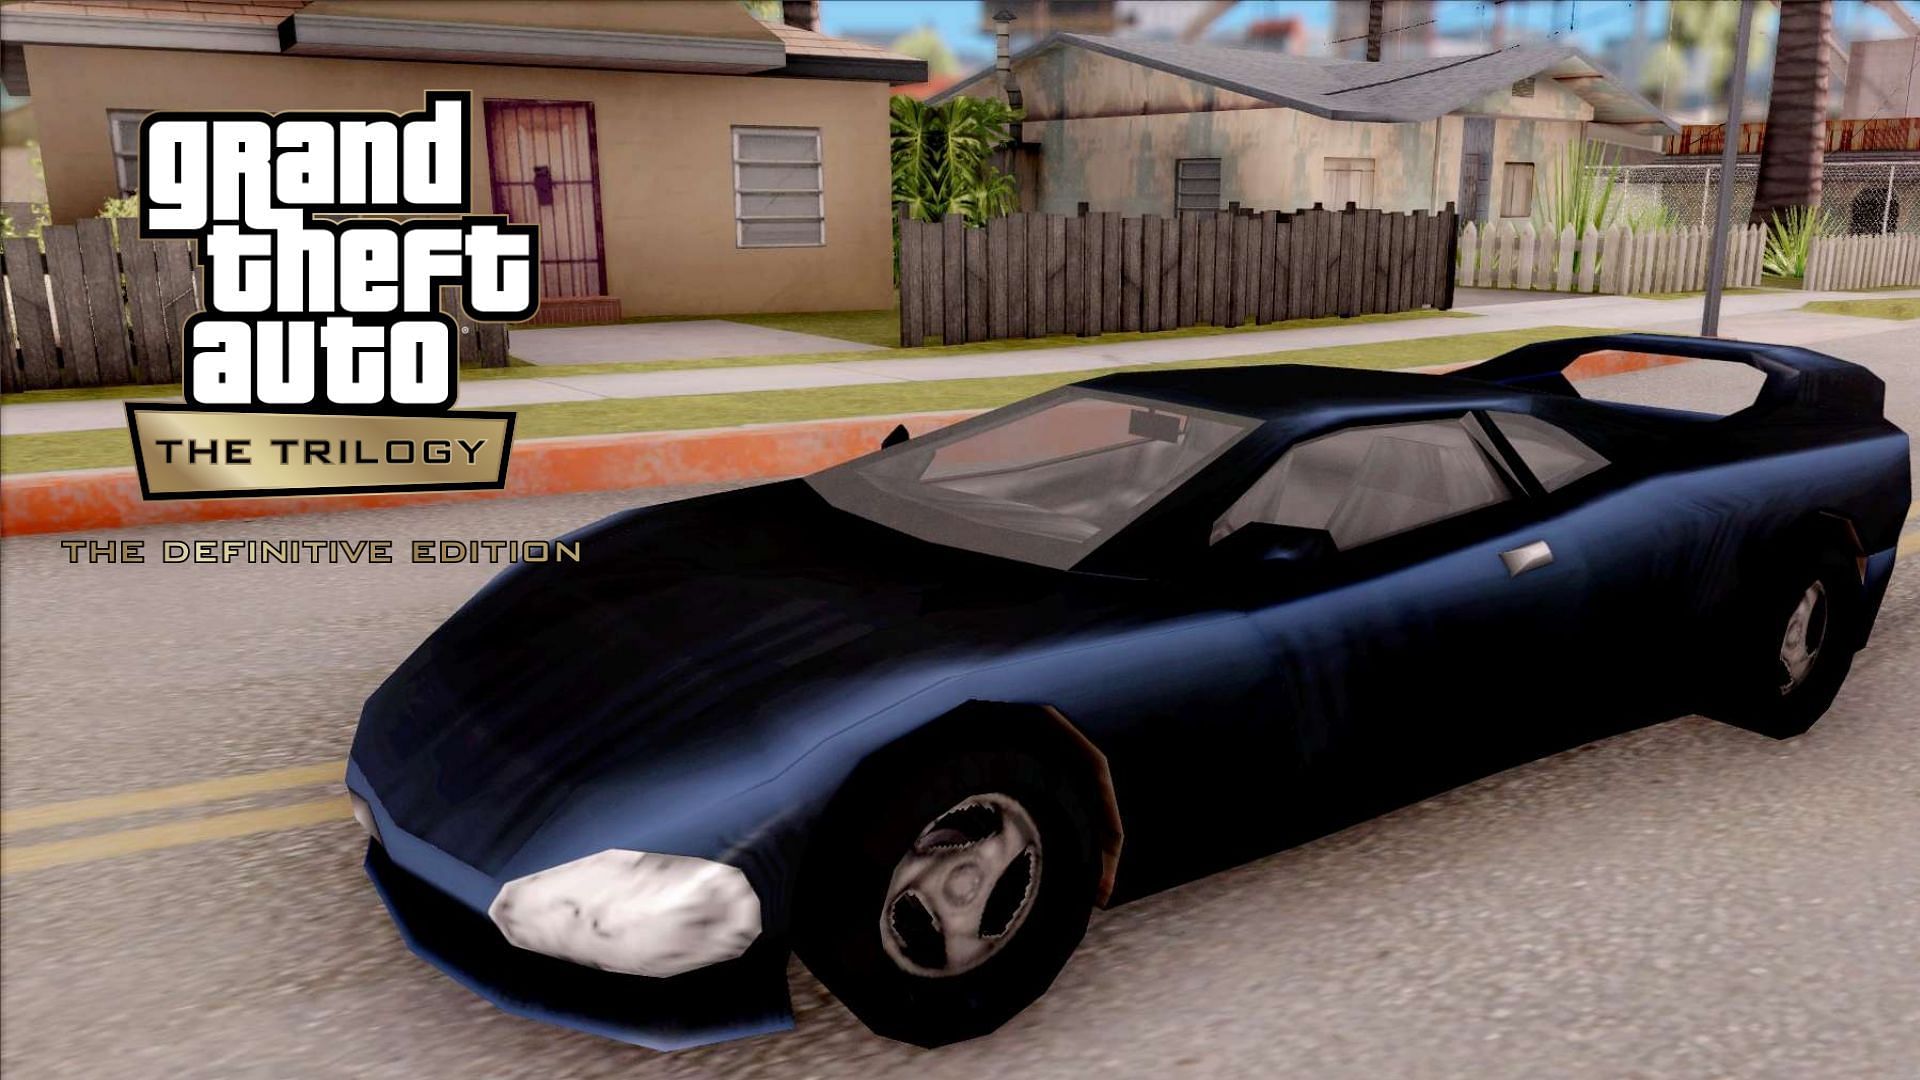 The 12 Fastest Cars in Grand Theft Auto: San Andreas – Definitive